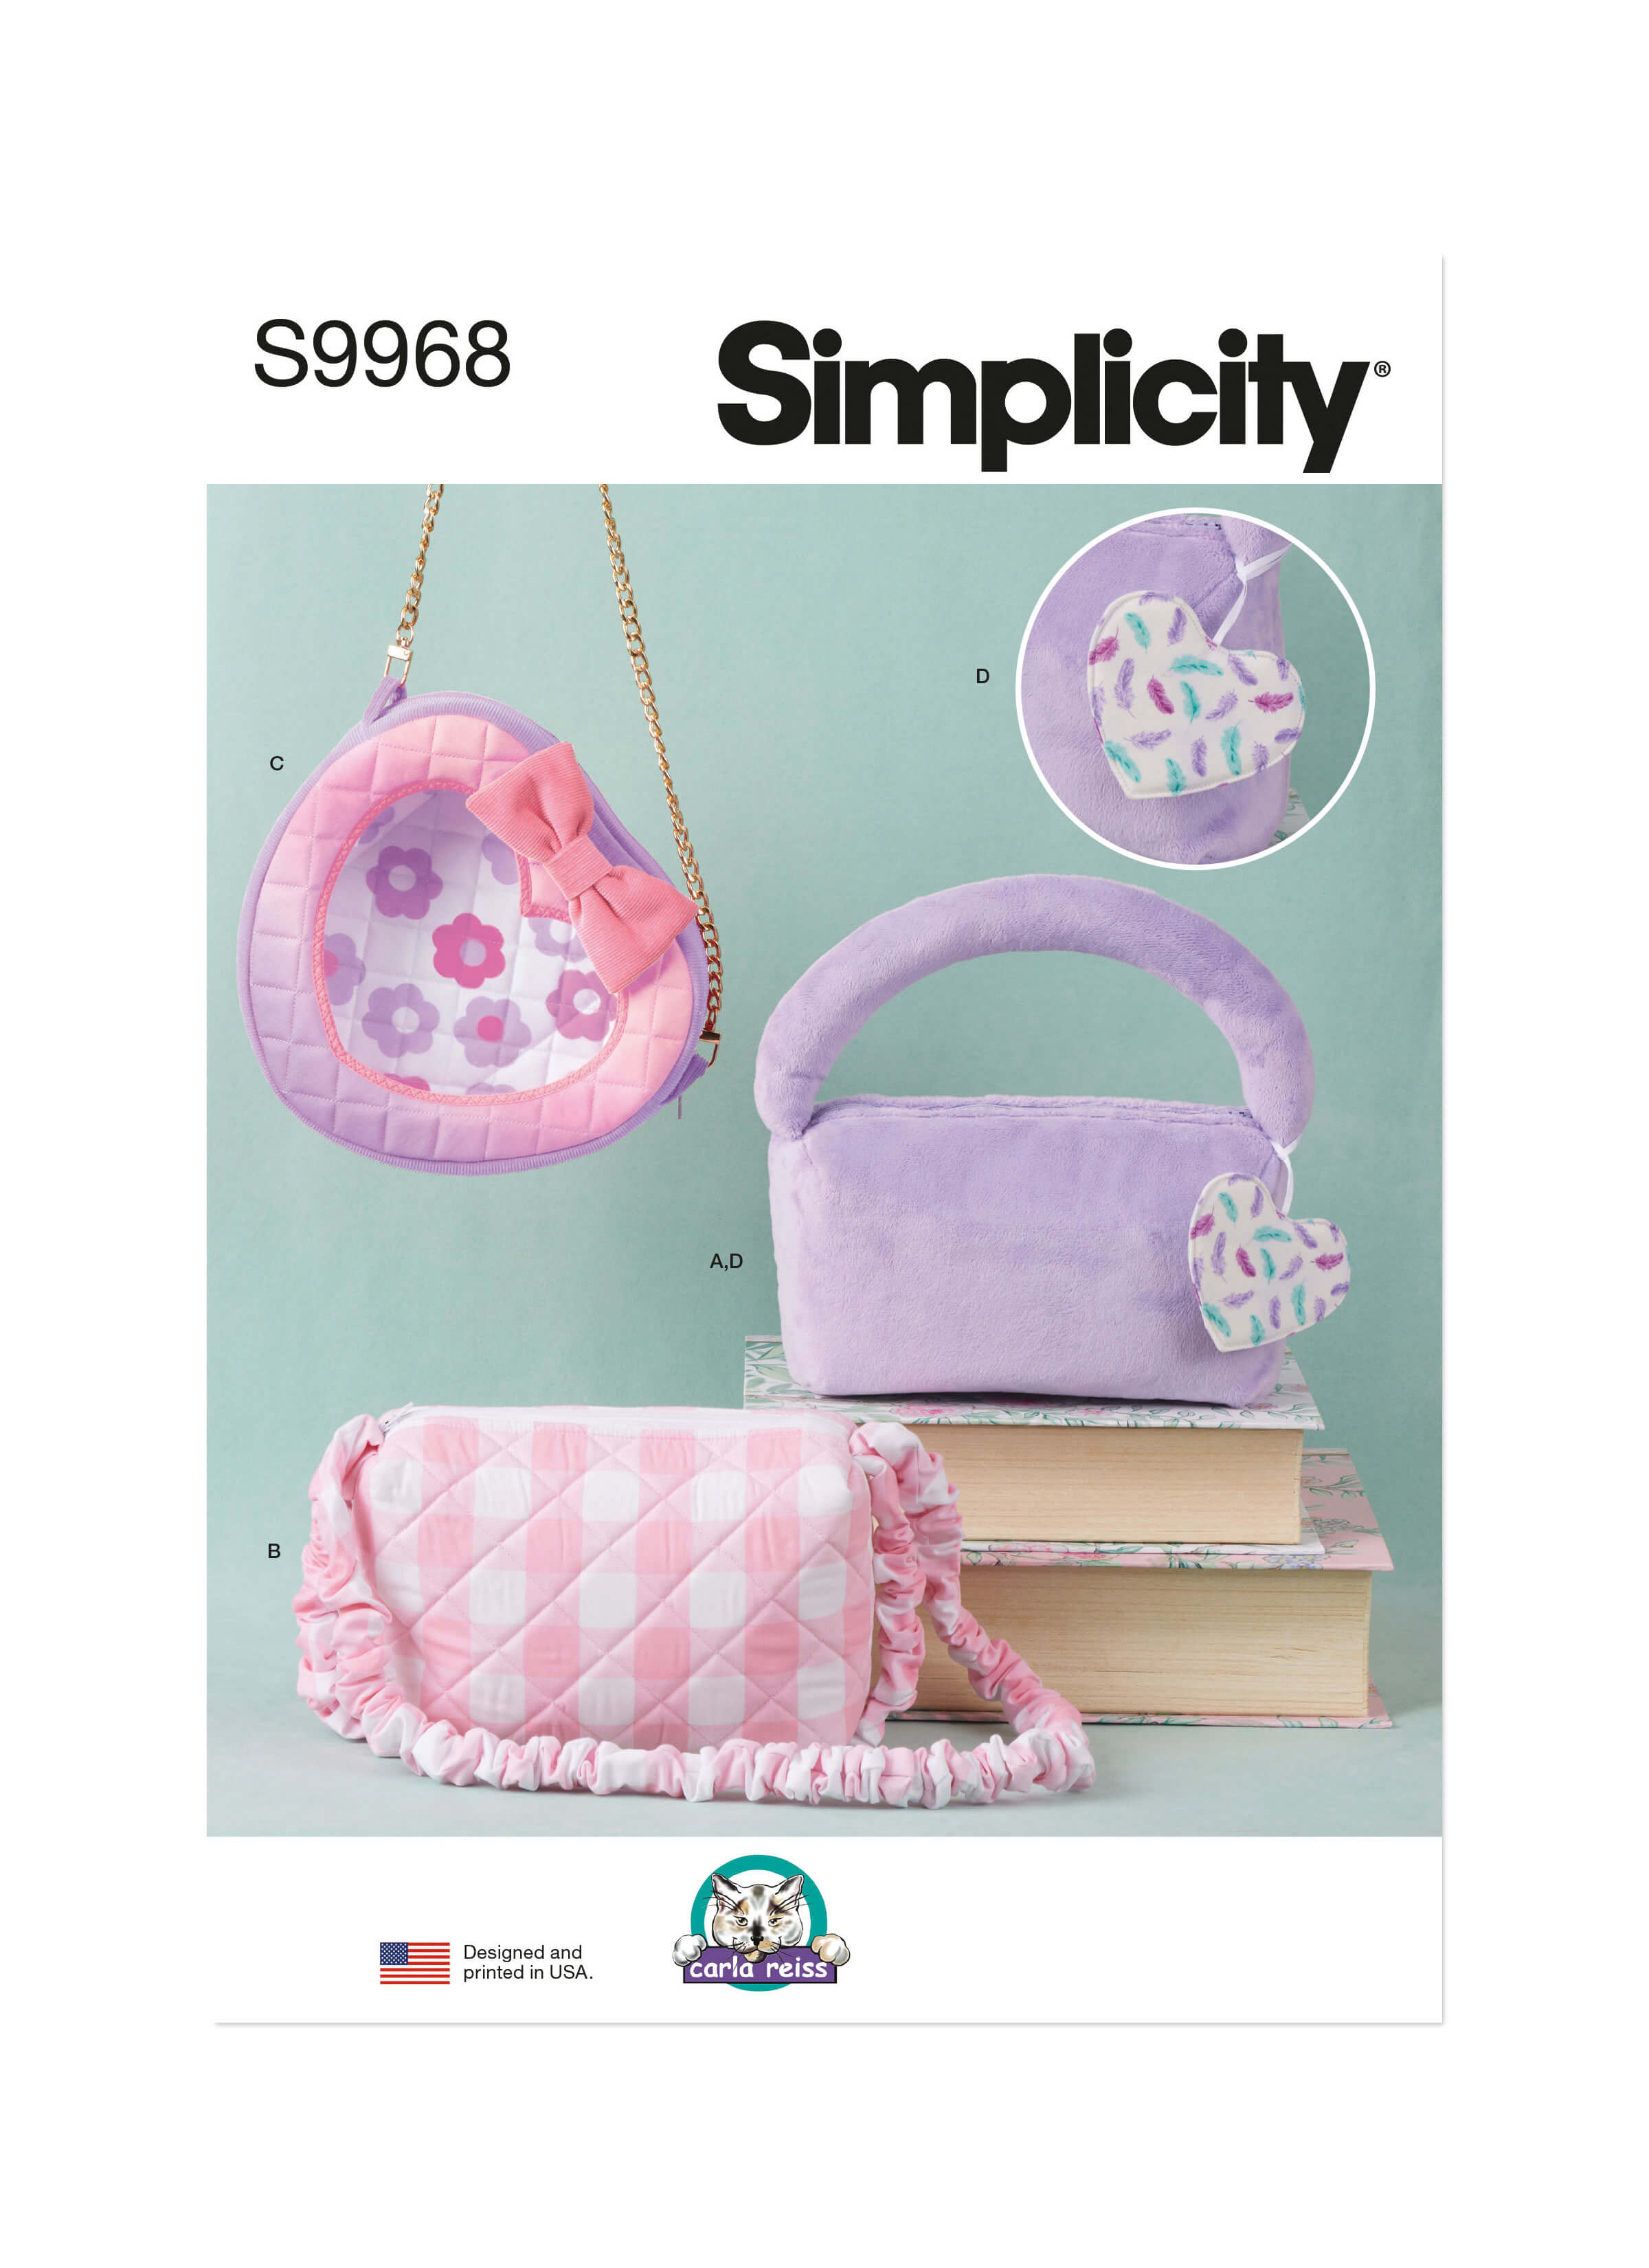 Simplicity Sewing Pattern S9968 Bags and Charm by Carla Reiss Design